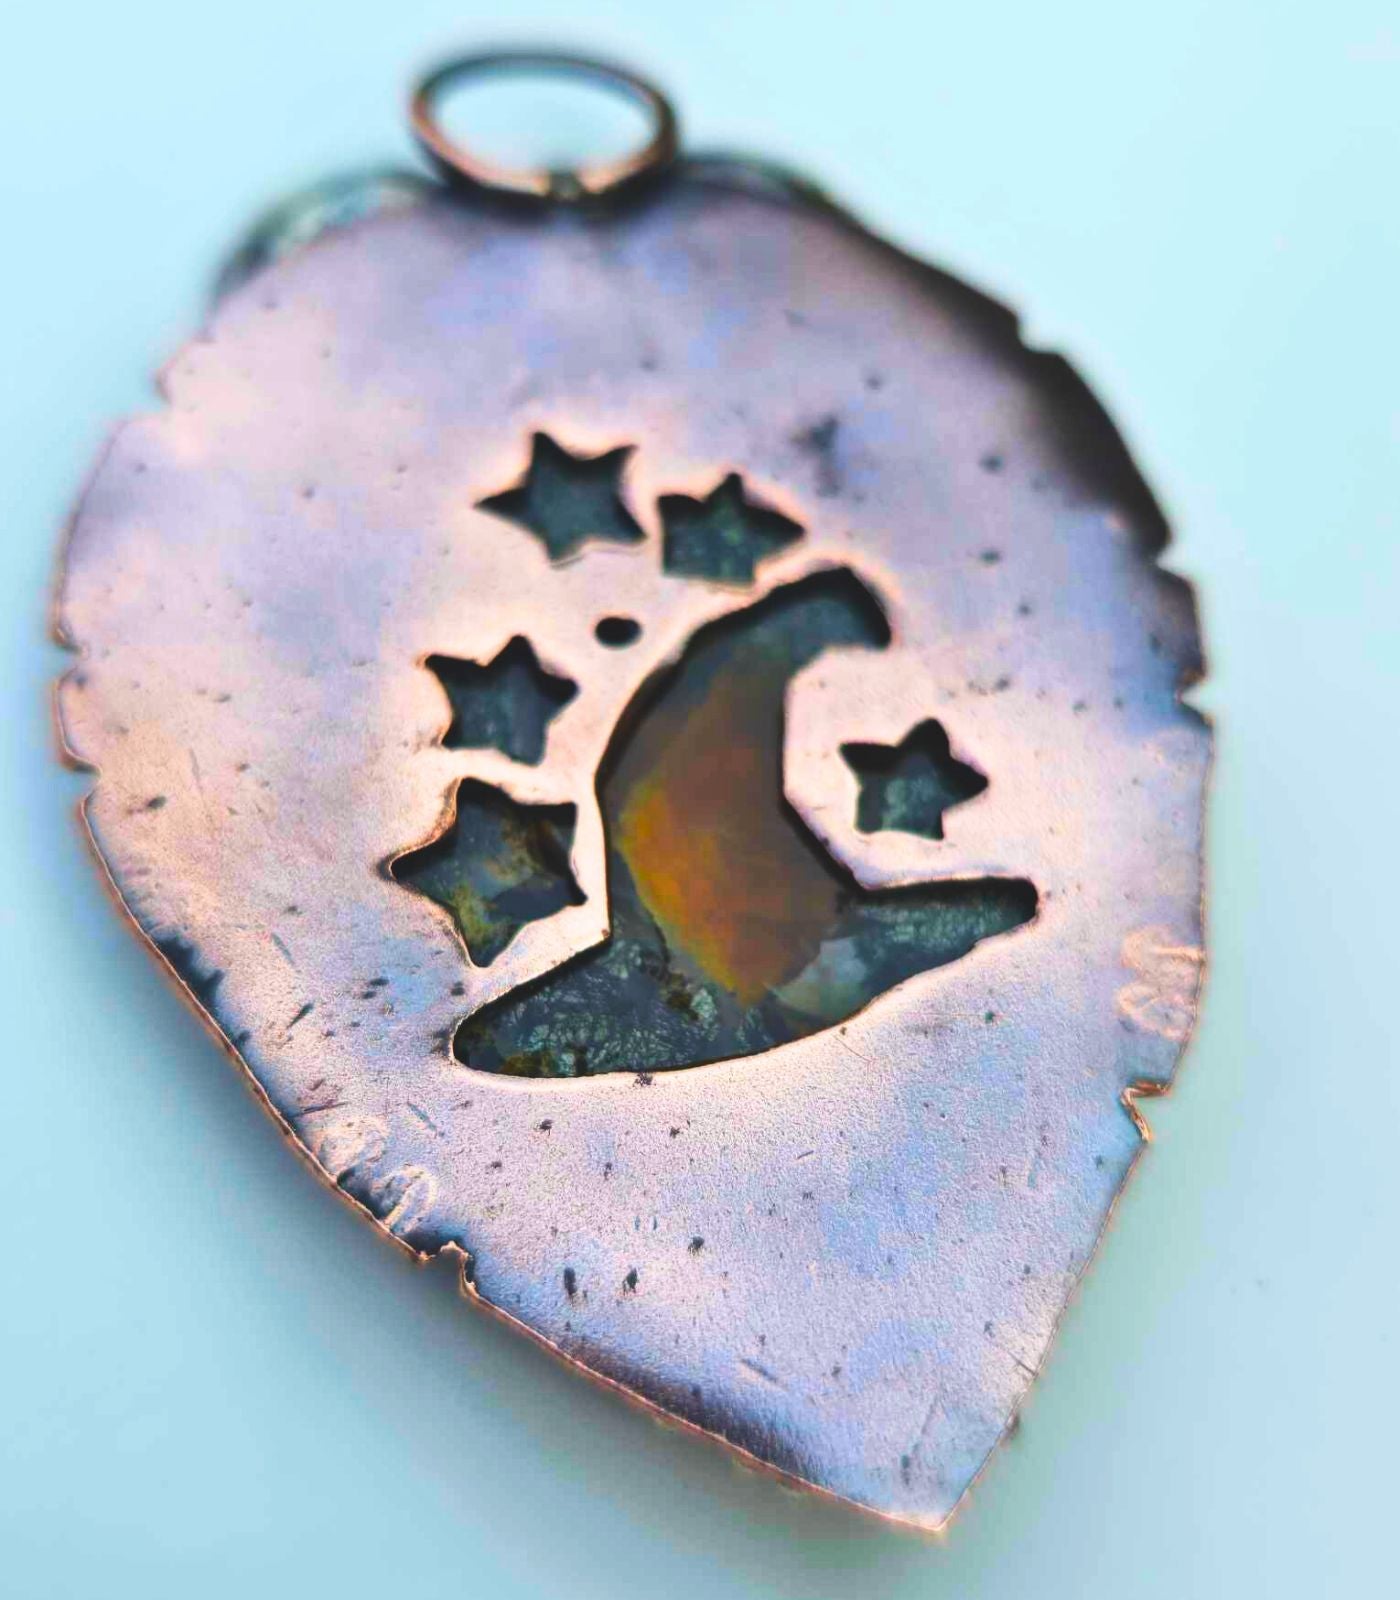 Nature-Inspired Copper Pendant with Marcasite Stone